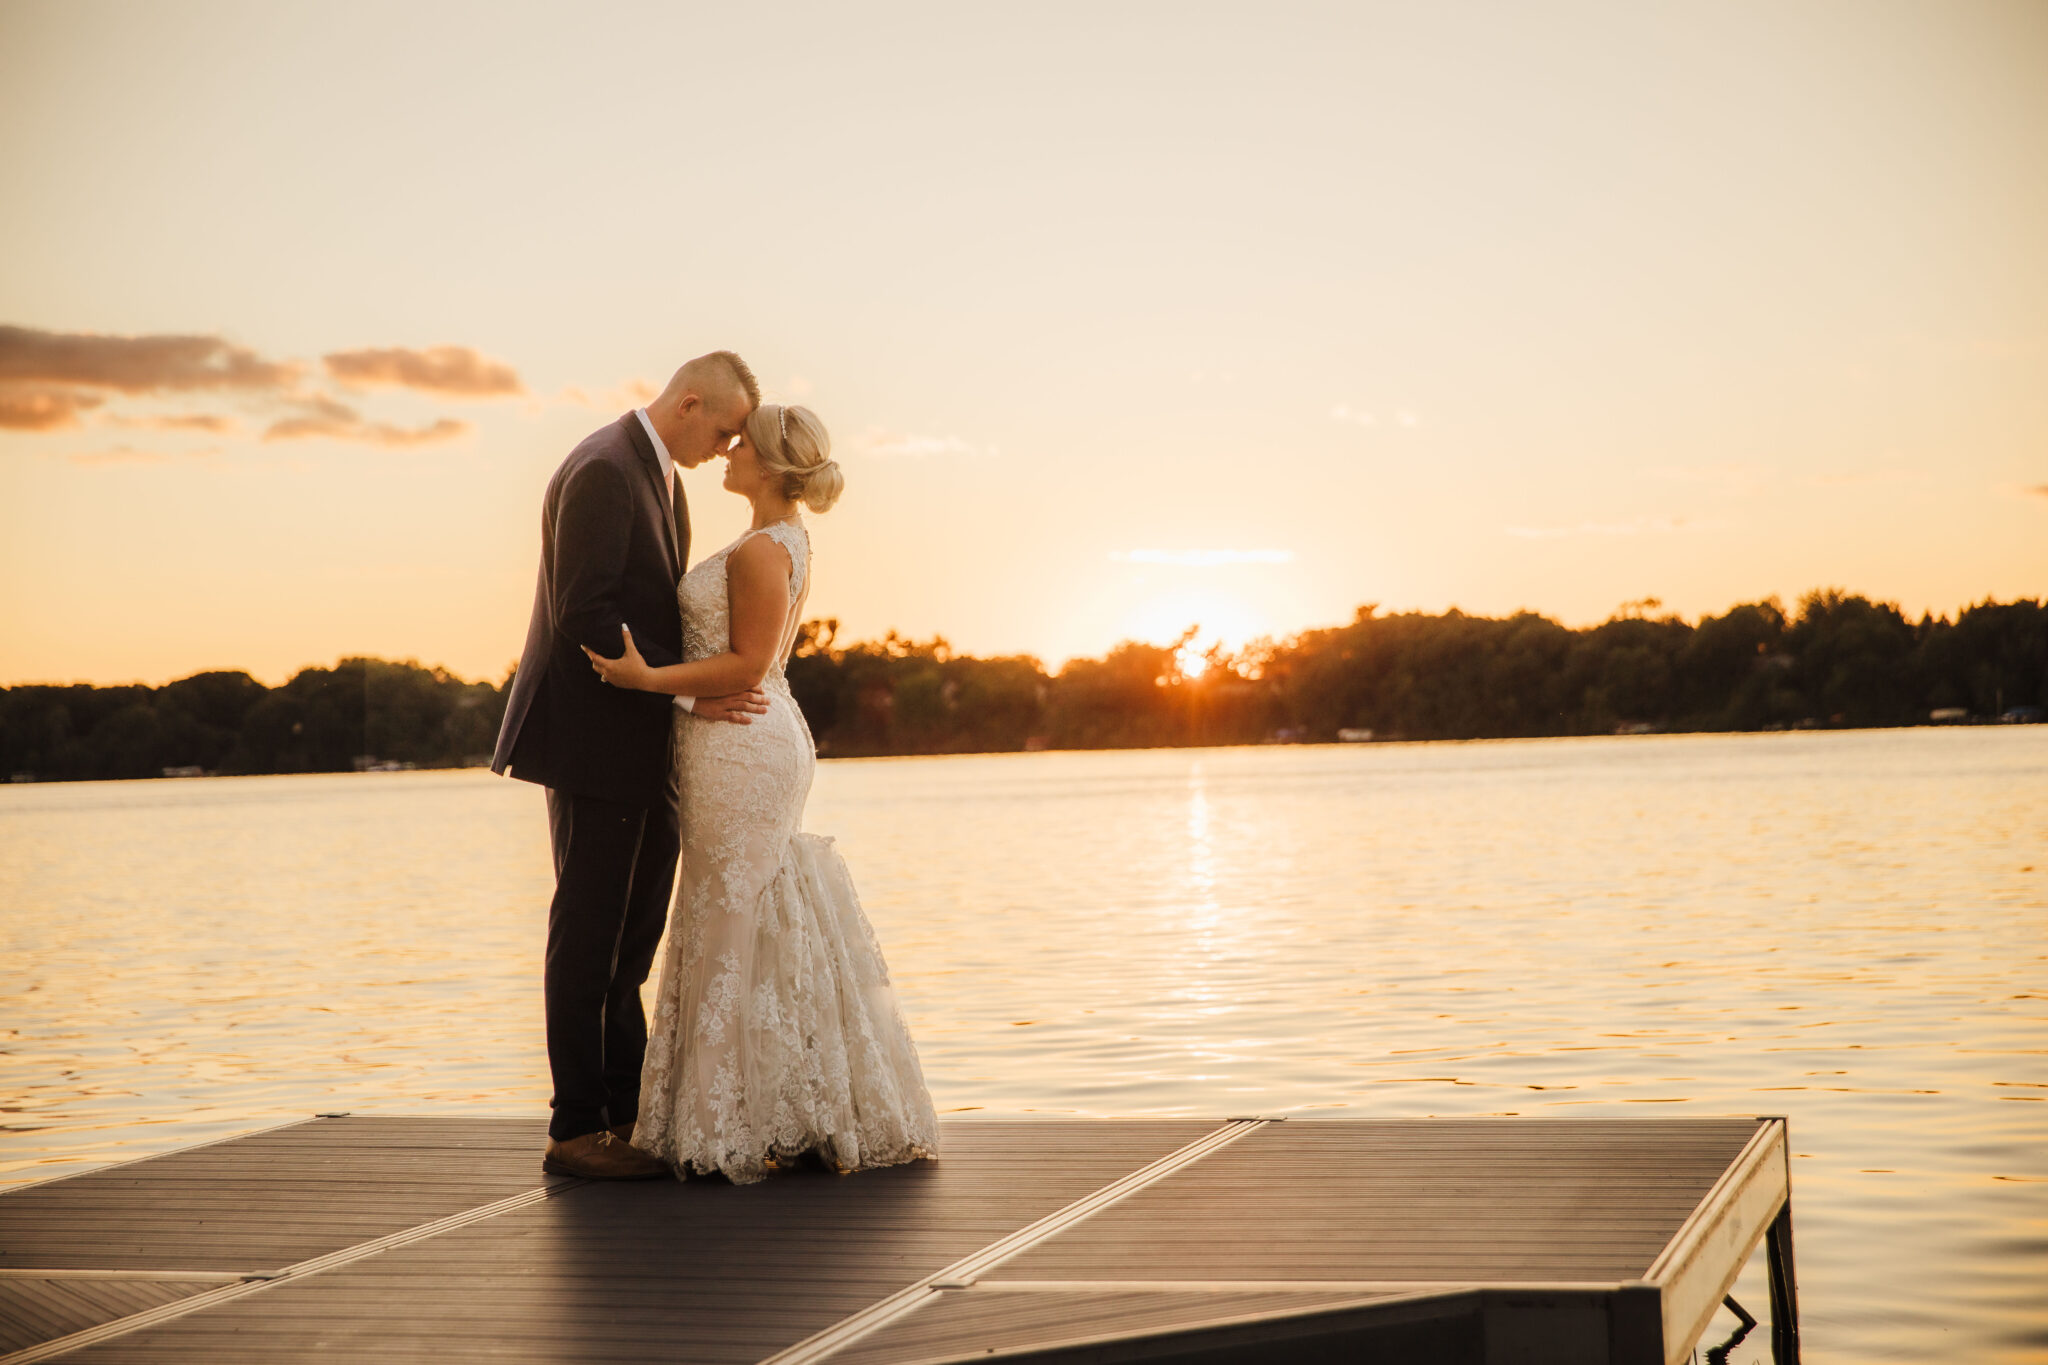 A stunning sunset wedding portrait of the bride and groom after their Wisconsin lakeside wedding ceremony. Sunset bridals Golden hour photography Wisconsin wedding photos #wisconsinweddingphotographer #choosingaphotographer #lakesidewedding #waterfrontweddingceremony